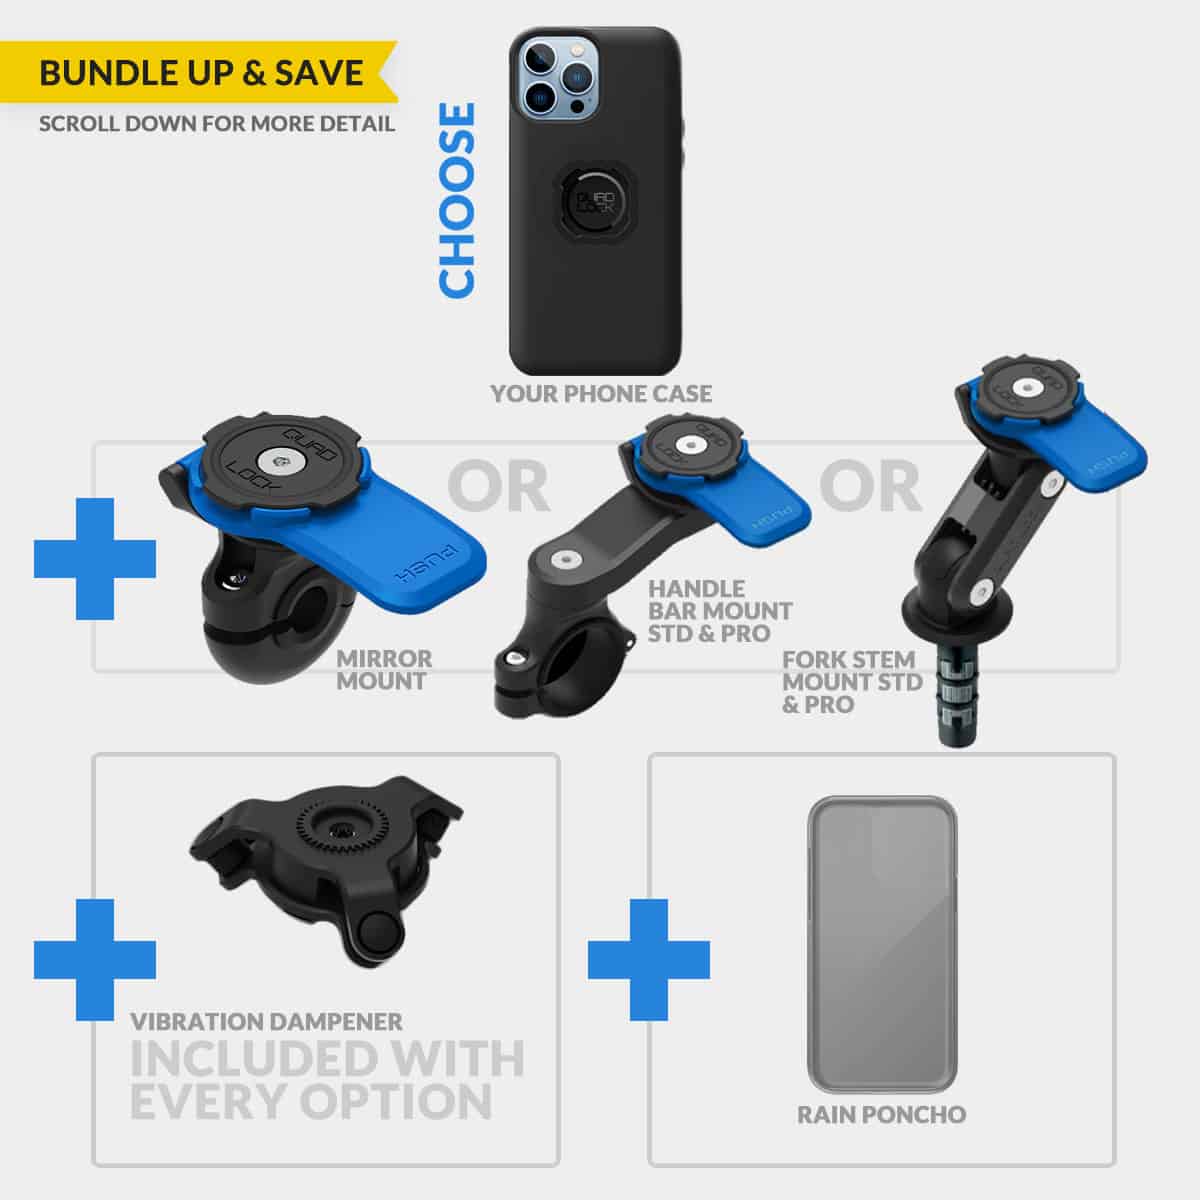 Buying your complete Quad Lock mobile phone case and mount could not be easier: Buy our bundle